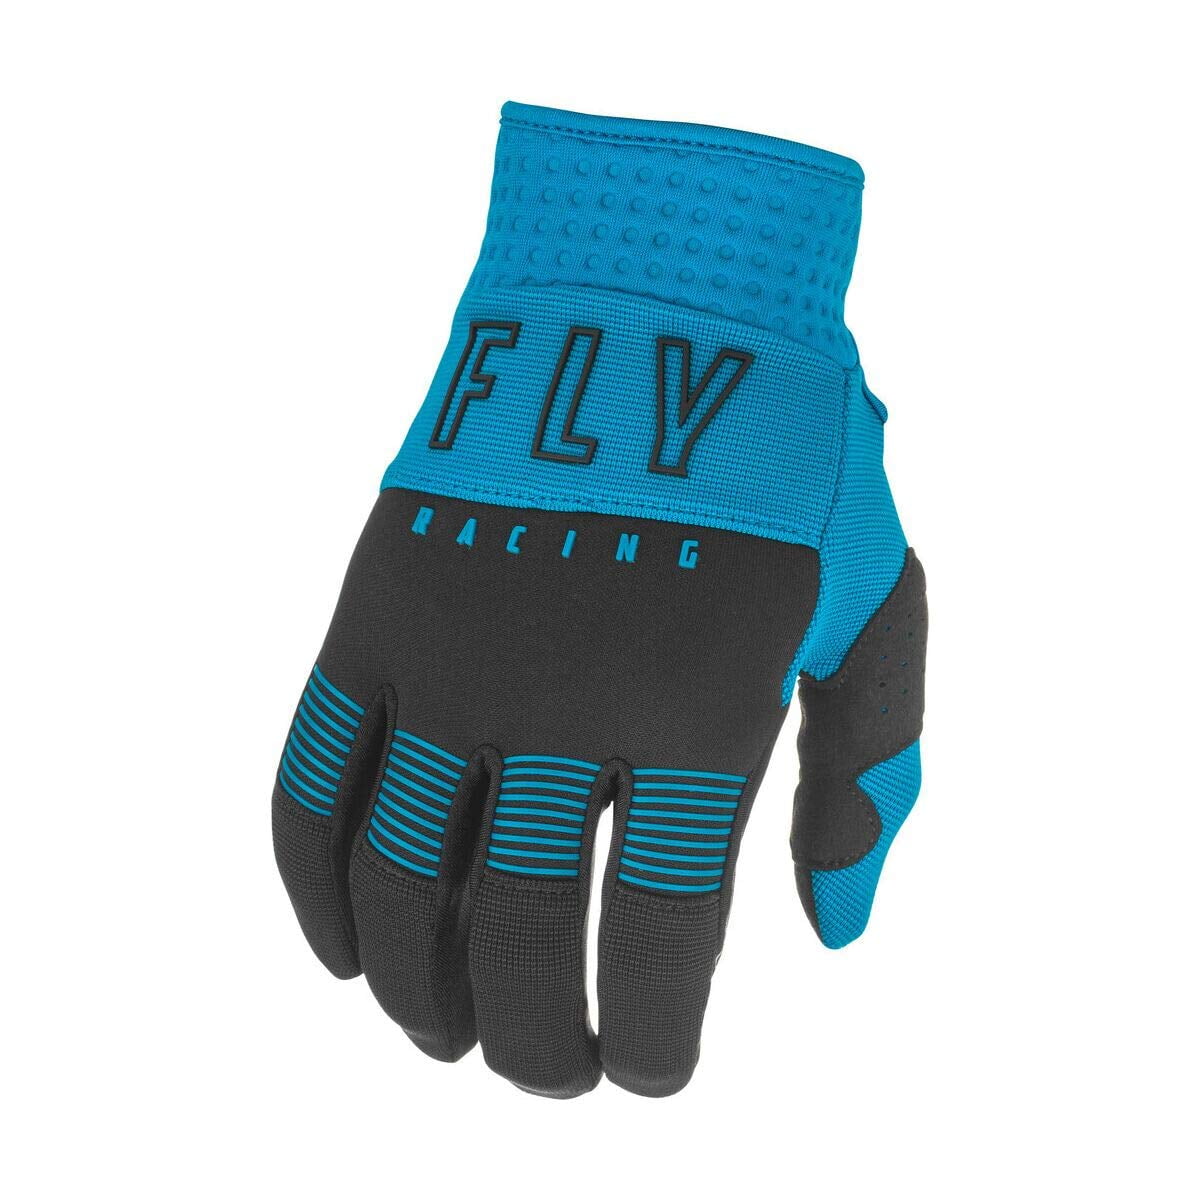 Fly Racing 2021 Youth F-16 MX Gloves Black/Grey